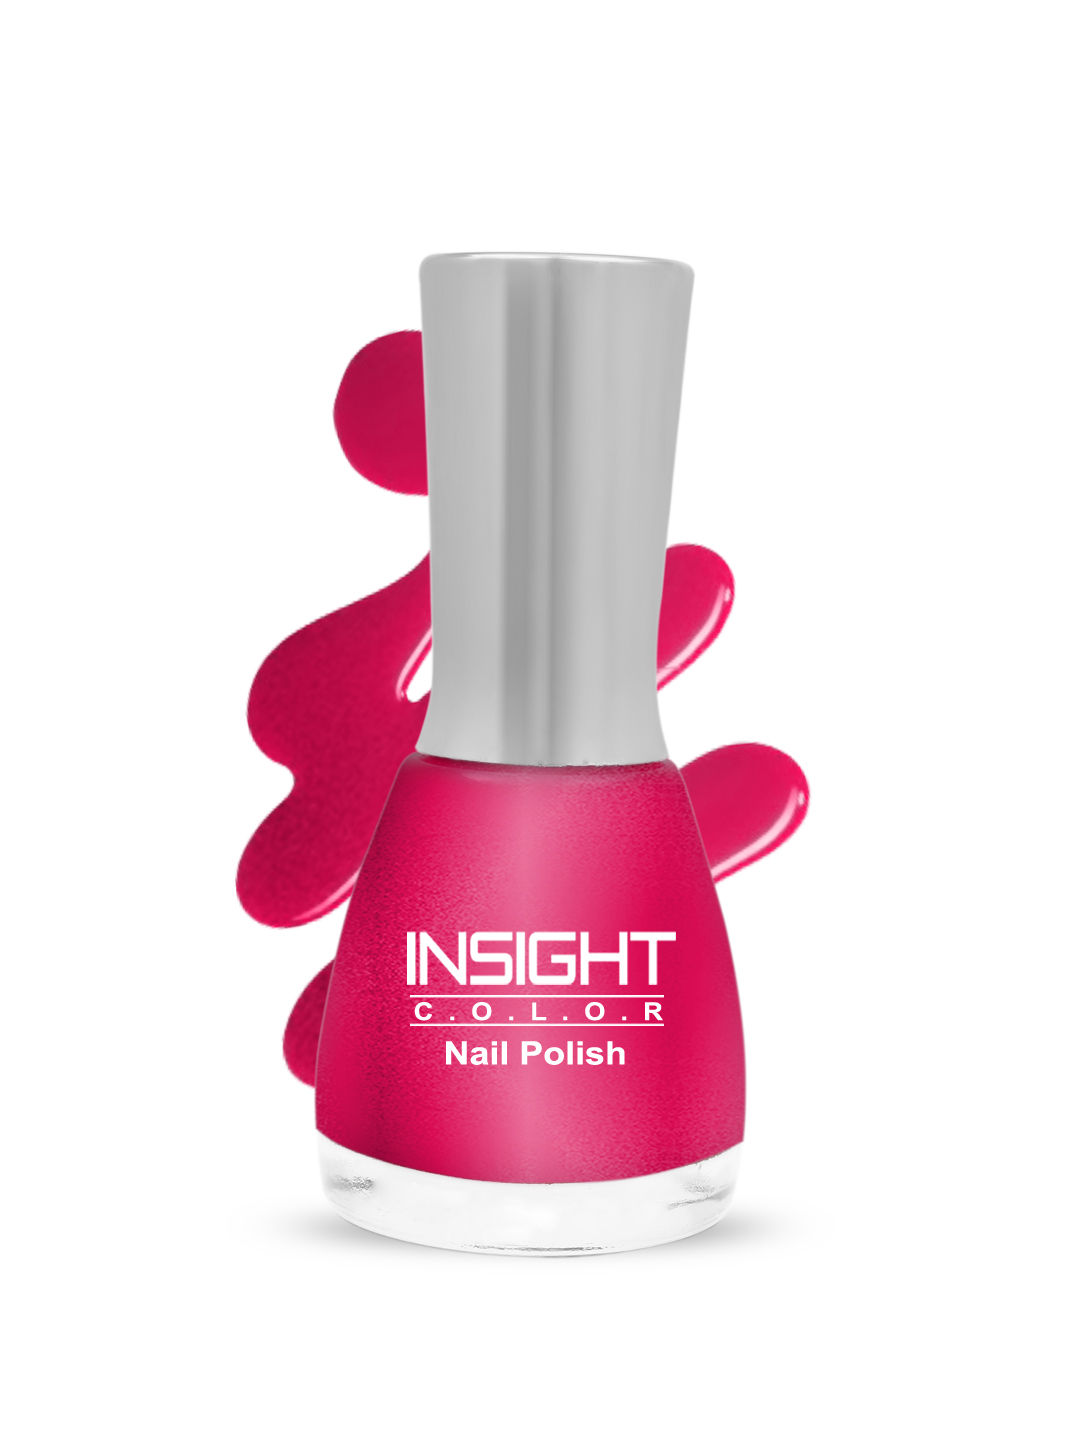 Buy Insight Pastel Color Nail Polish - 28 Online On DMart Ready